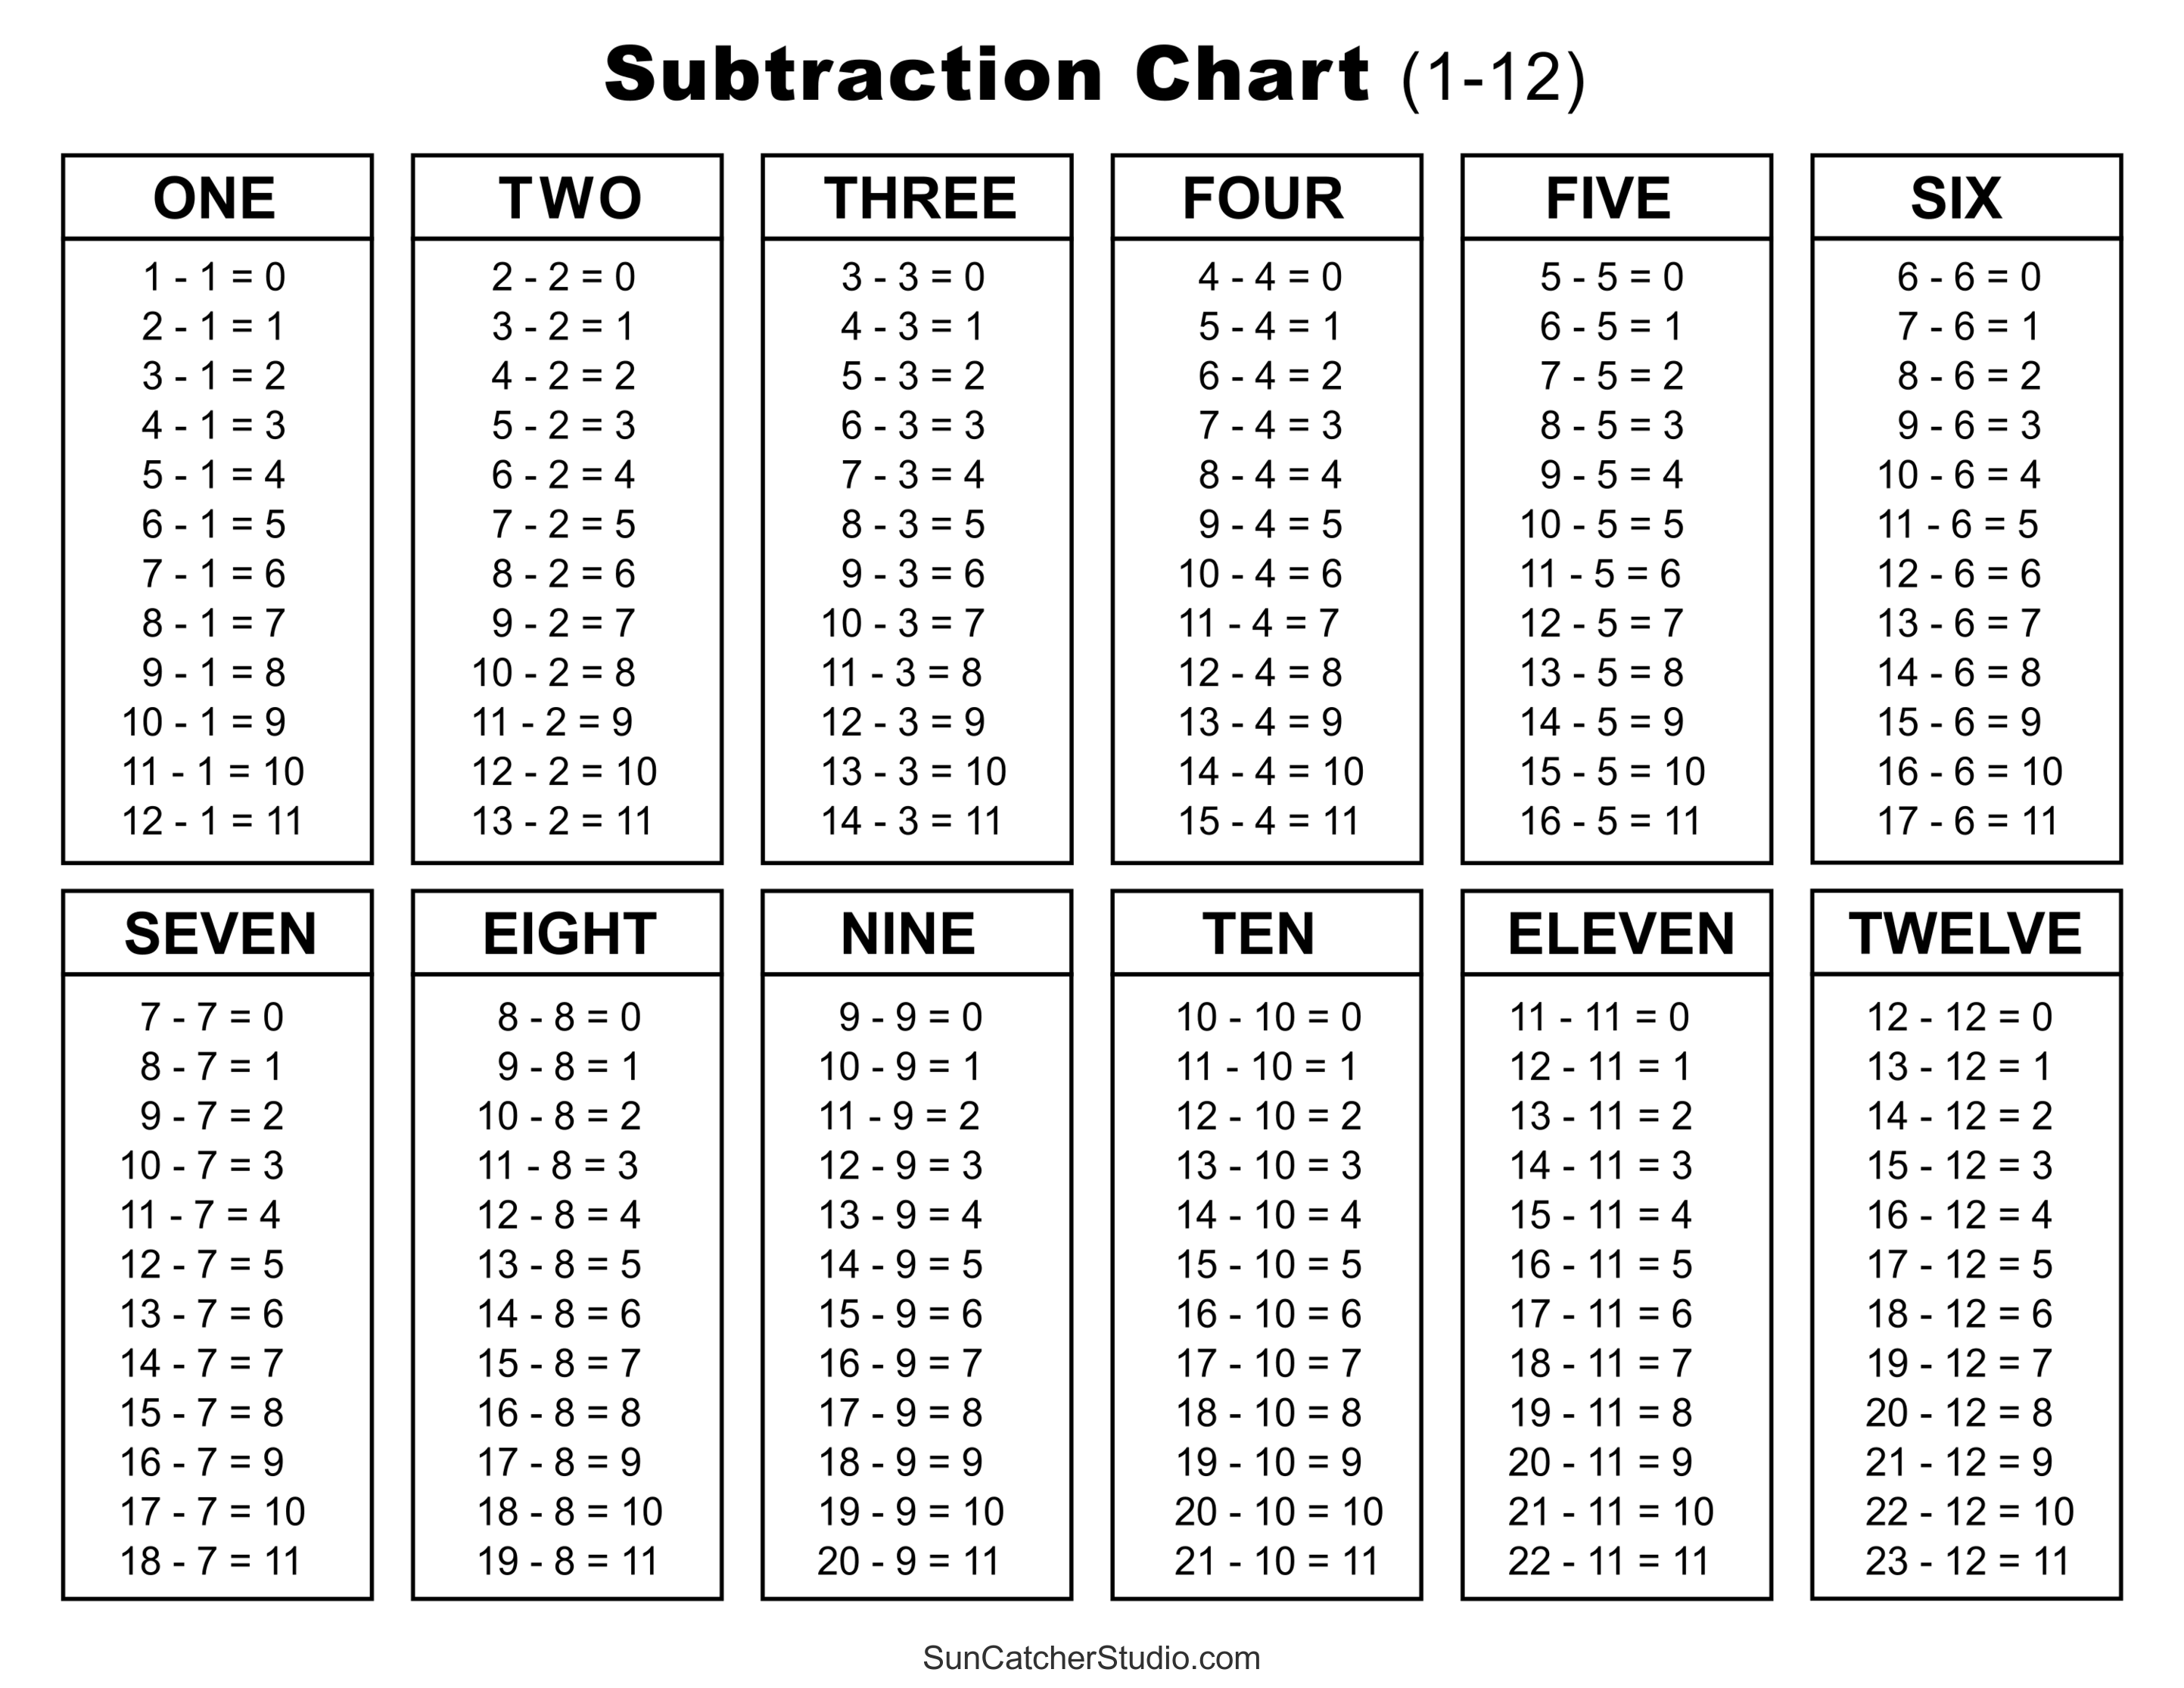 Subtraction Tables Worksheets Charts Math Drills PDF DIY Projects Patterns Monograms Designs Templates